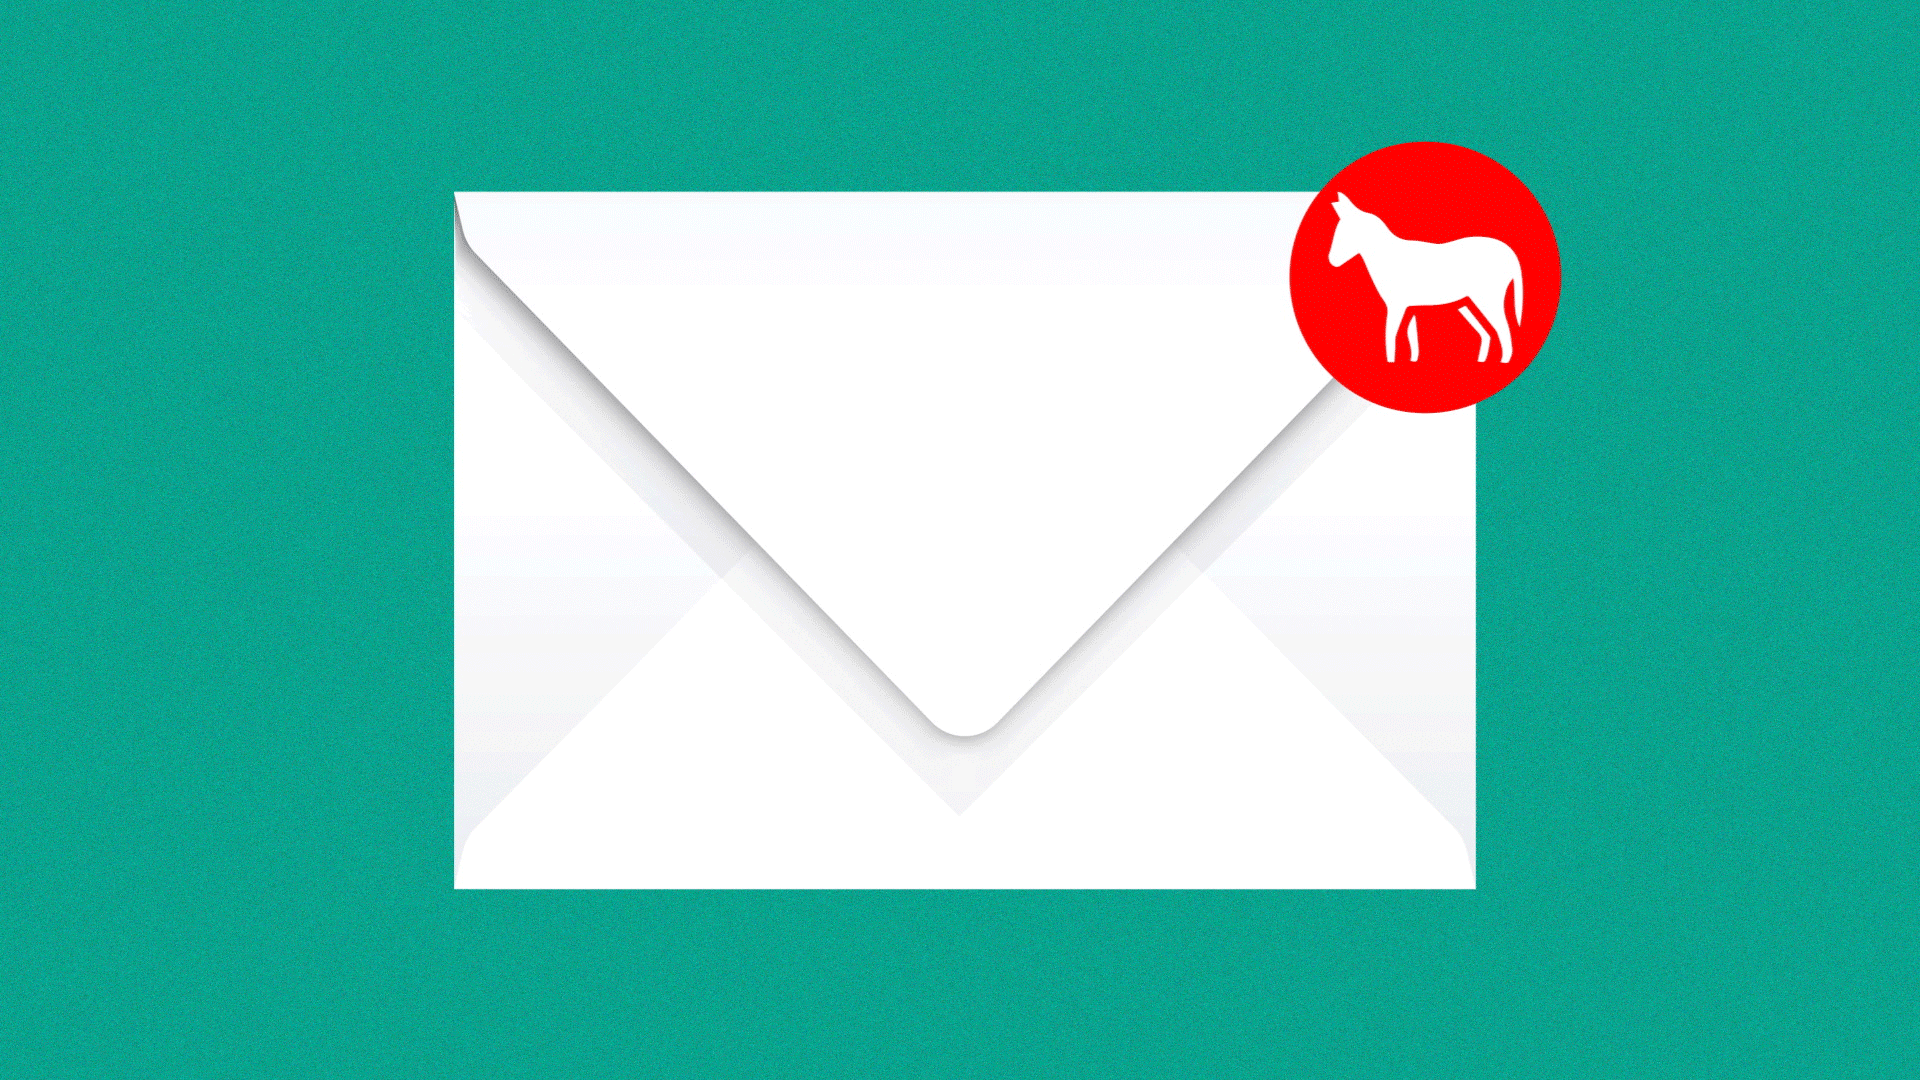 An animated illustration of an envelope with Republican and Democrat symbols